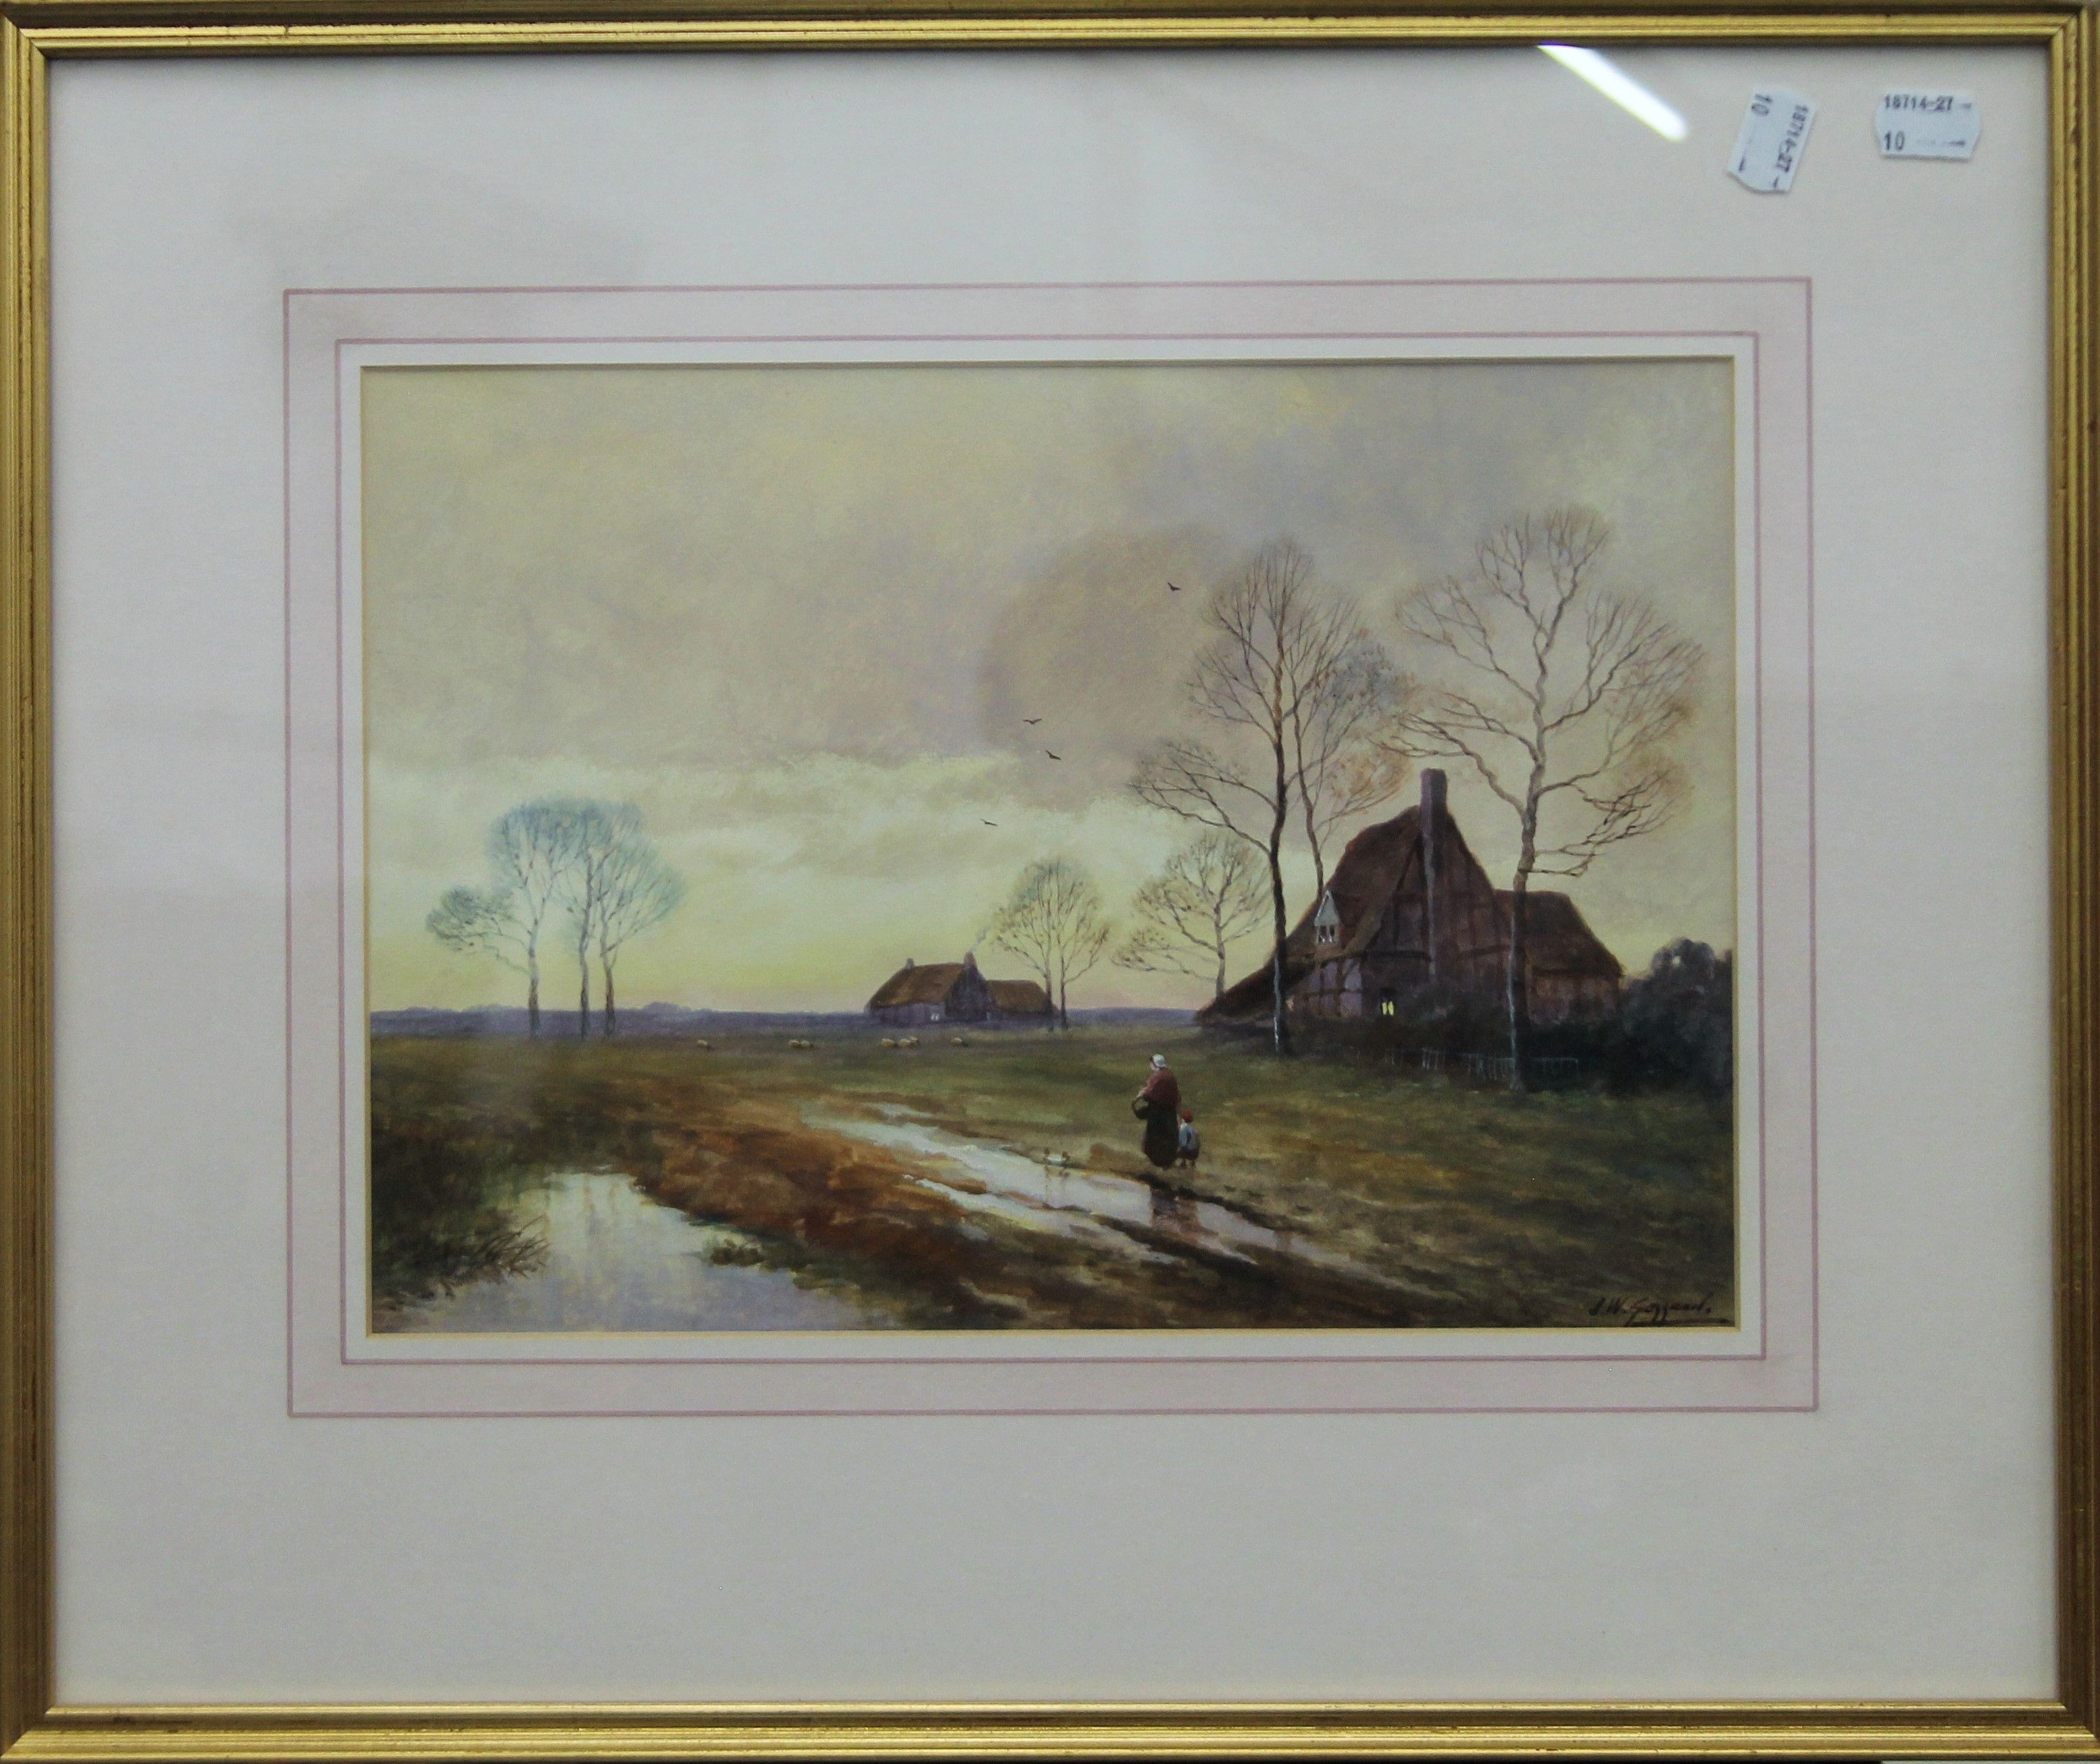 J W GOZZARD, Landscapes, a pair of watercolours, signed, framed and glazed. 34 x 24.5 cm. - Image 5 of 6